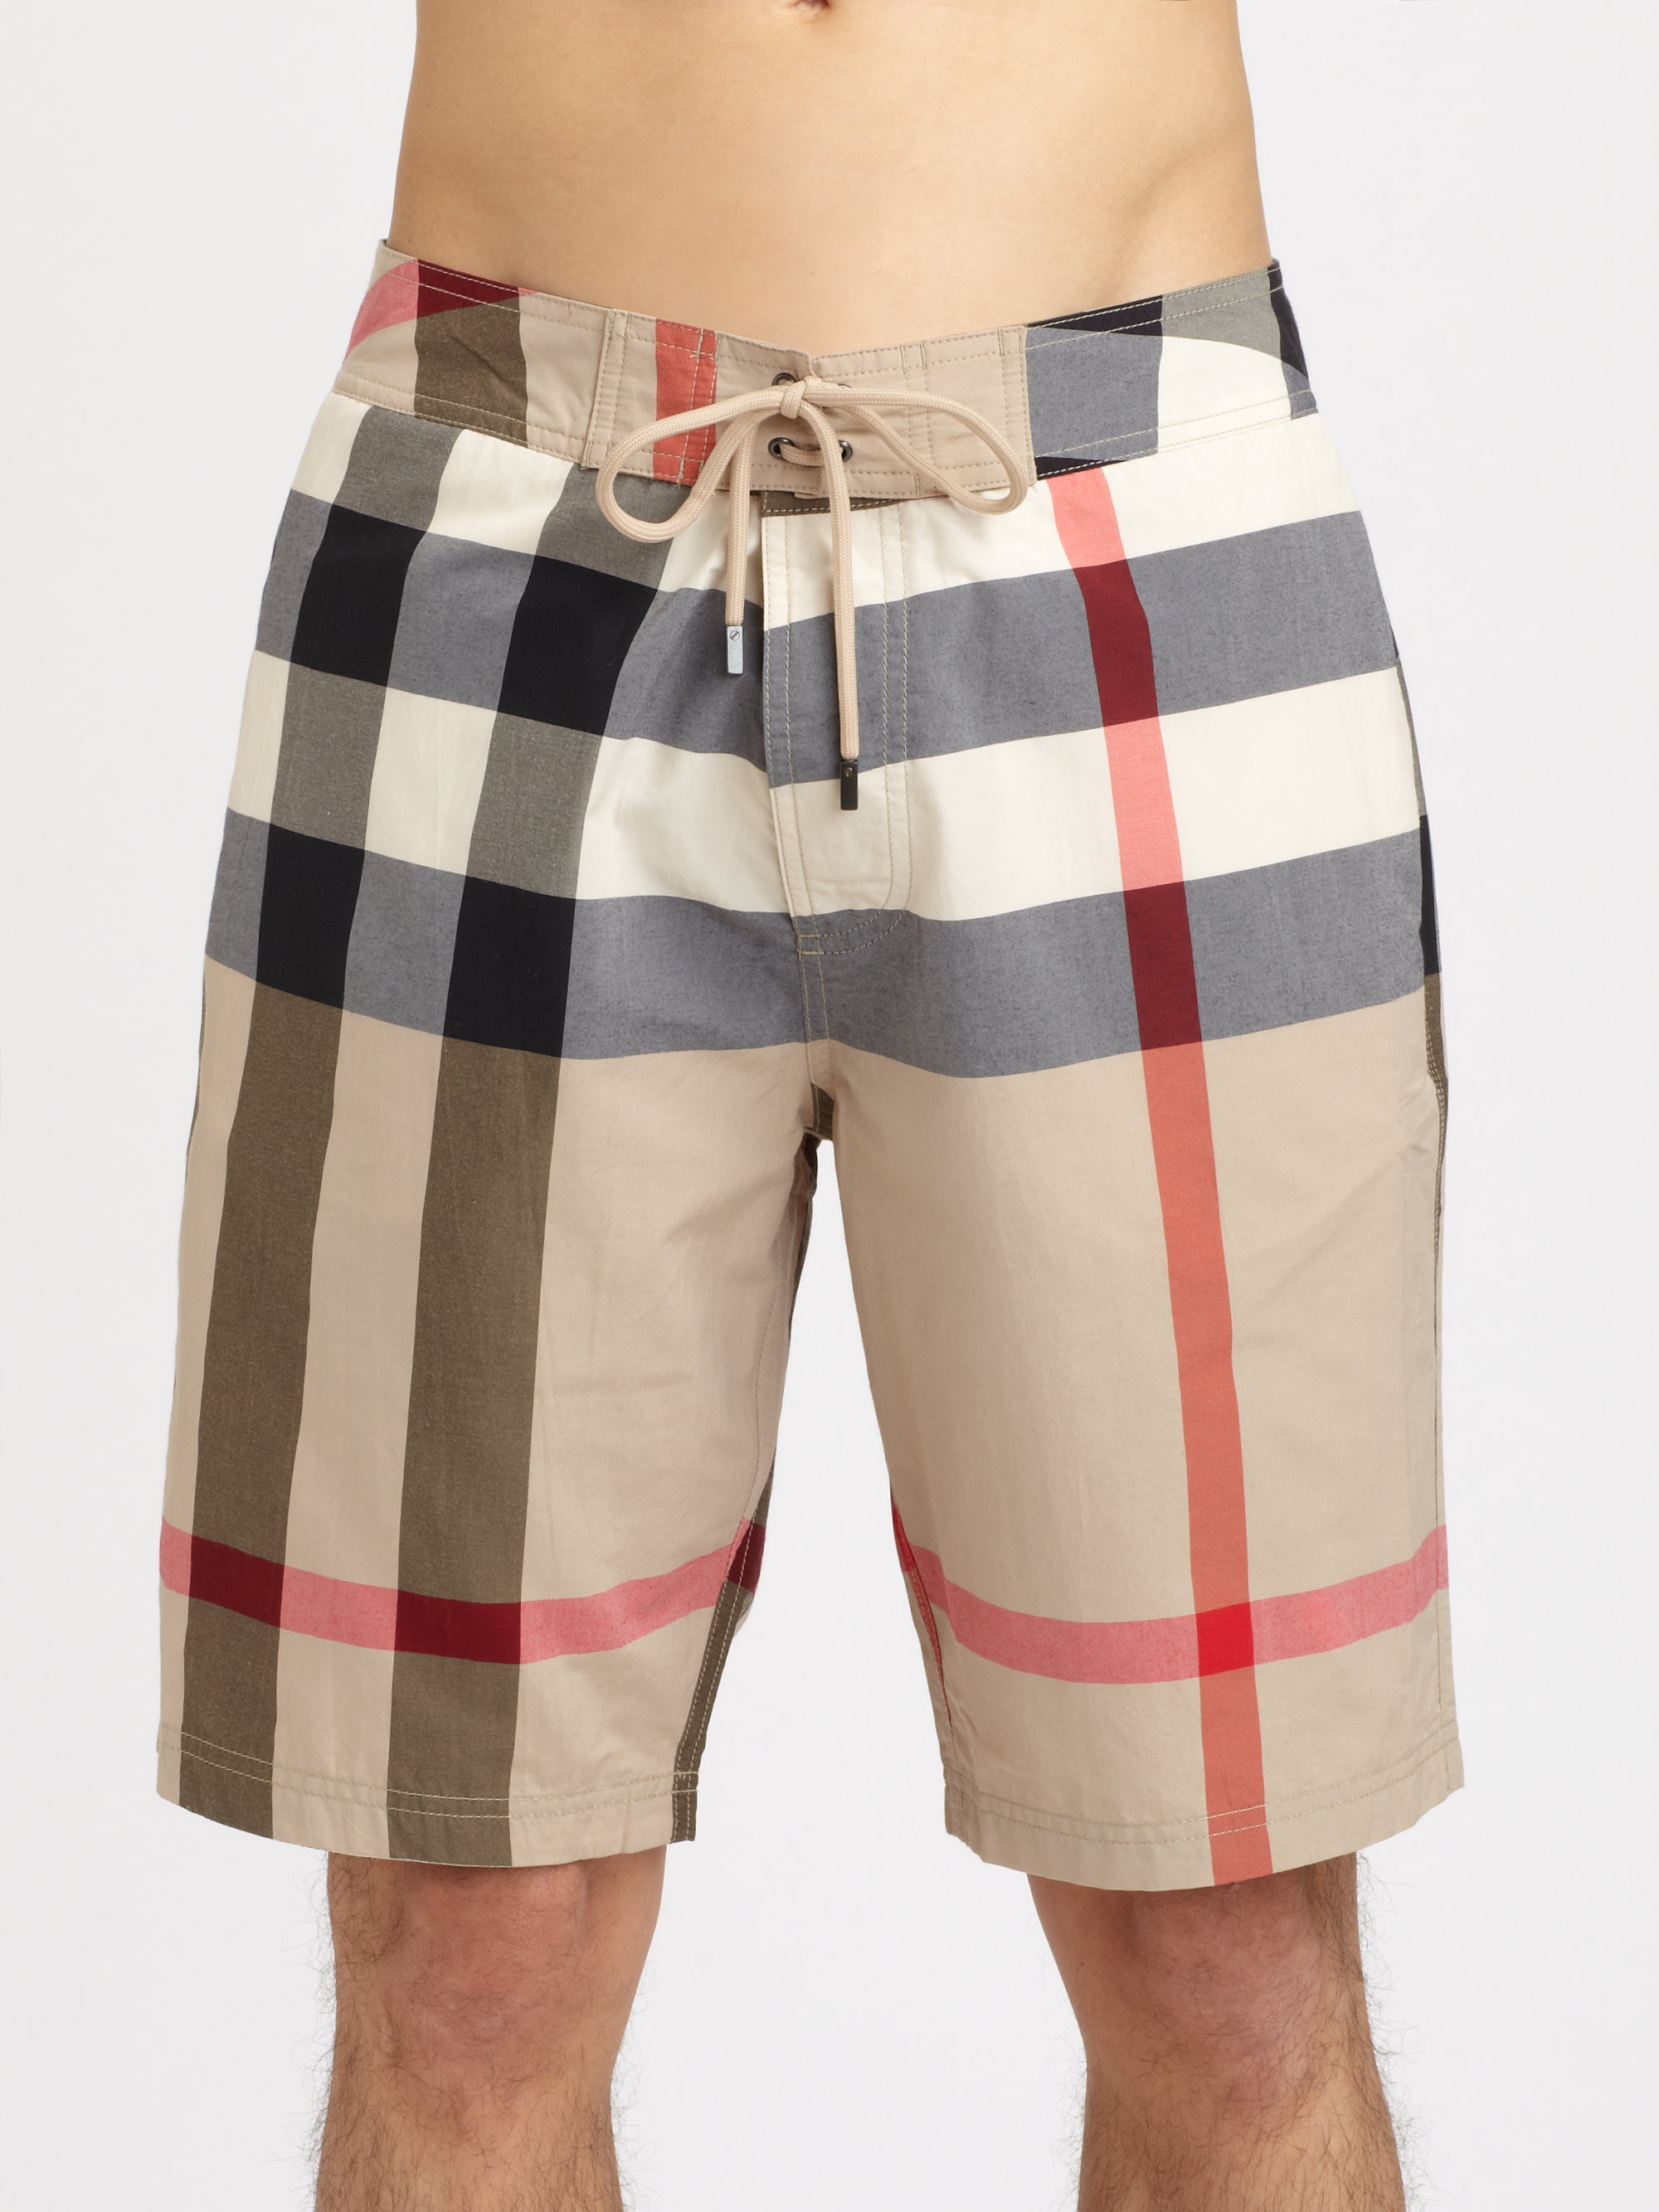 burberry cargo shorts Online Shopping for Women, Men, Kids Fashion &  Lifestyle|Free Delivery & Returns! -